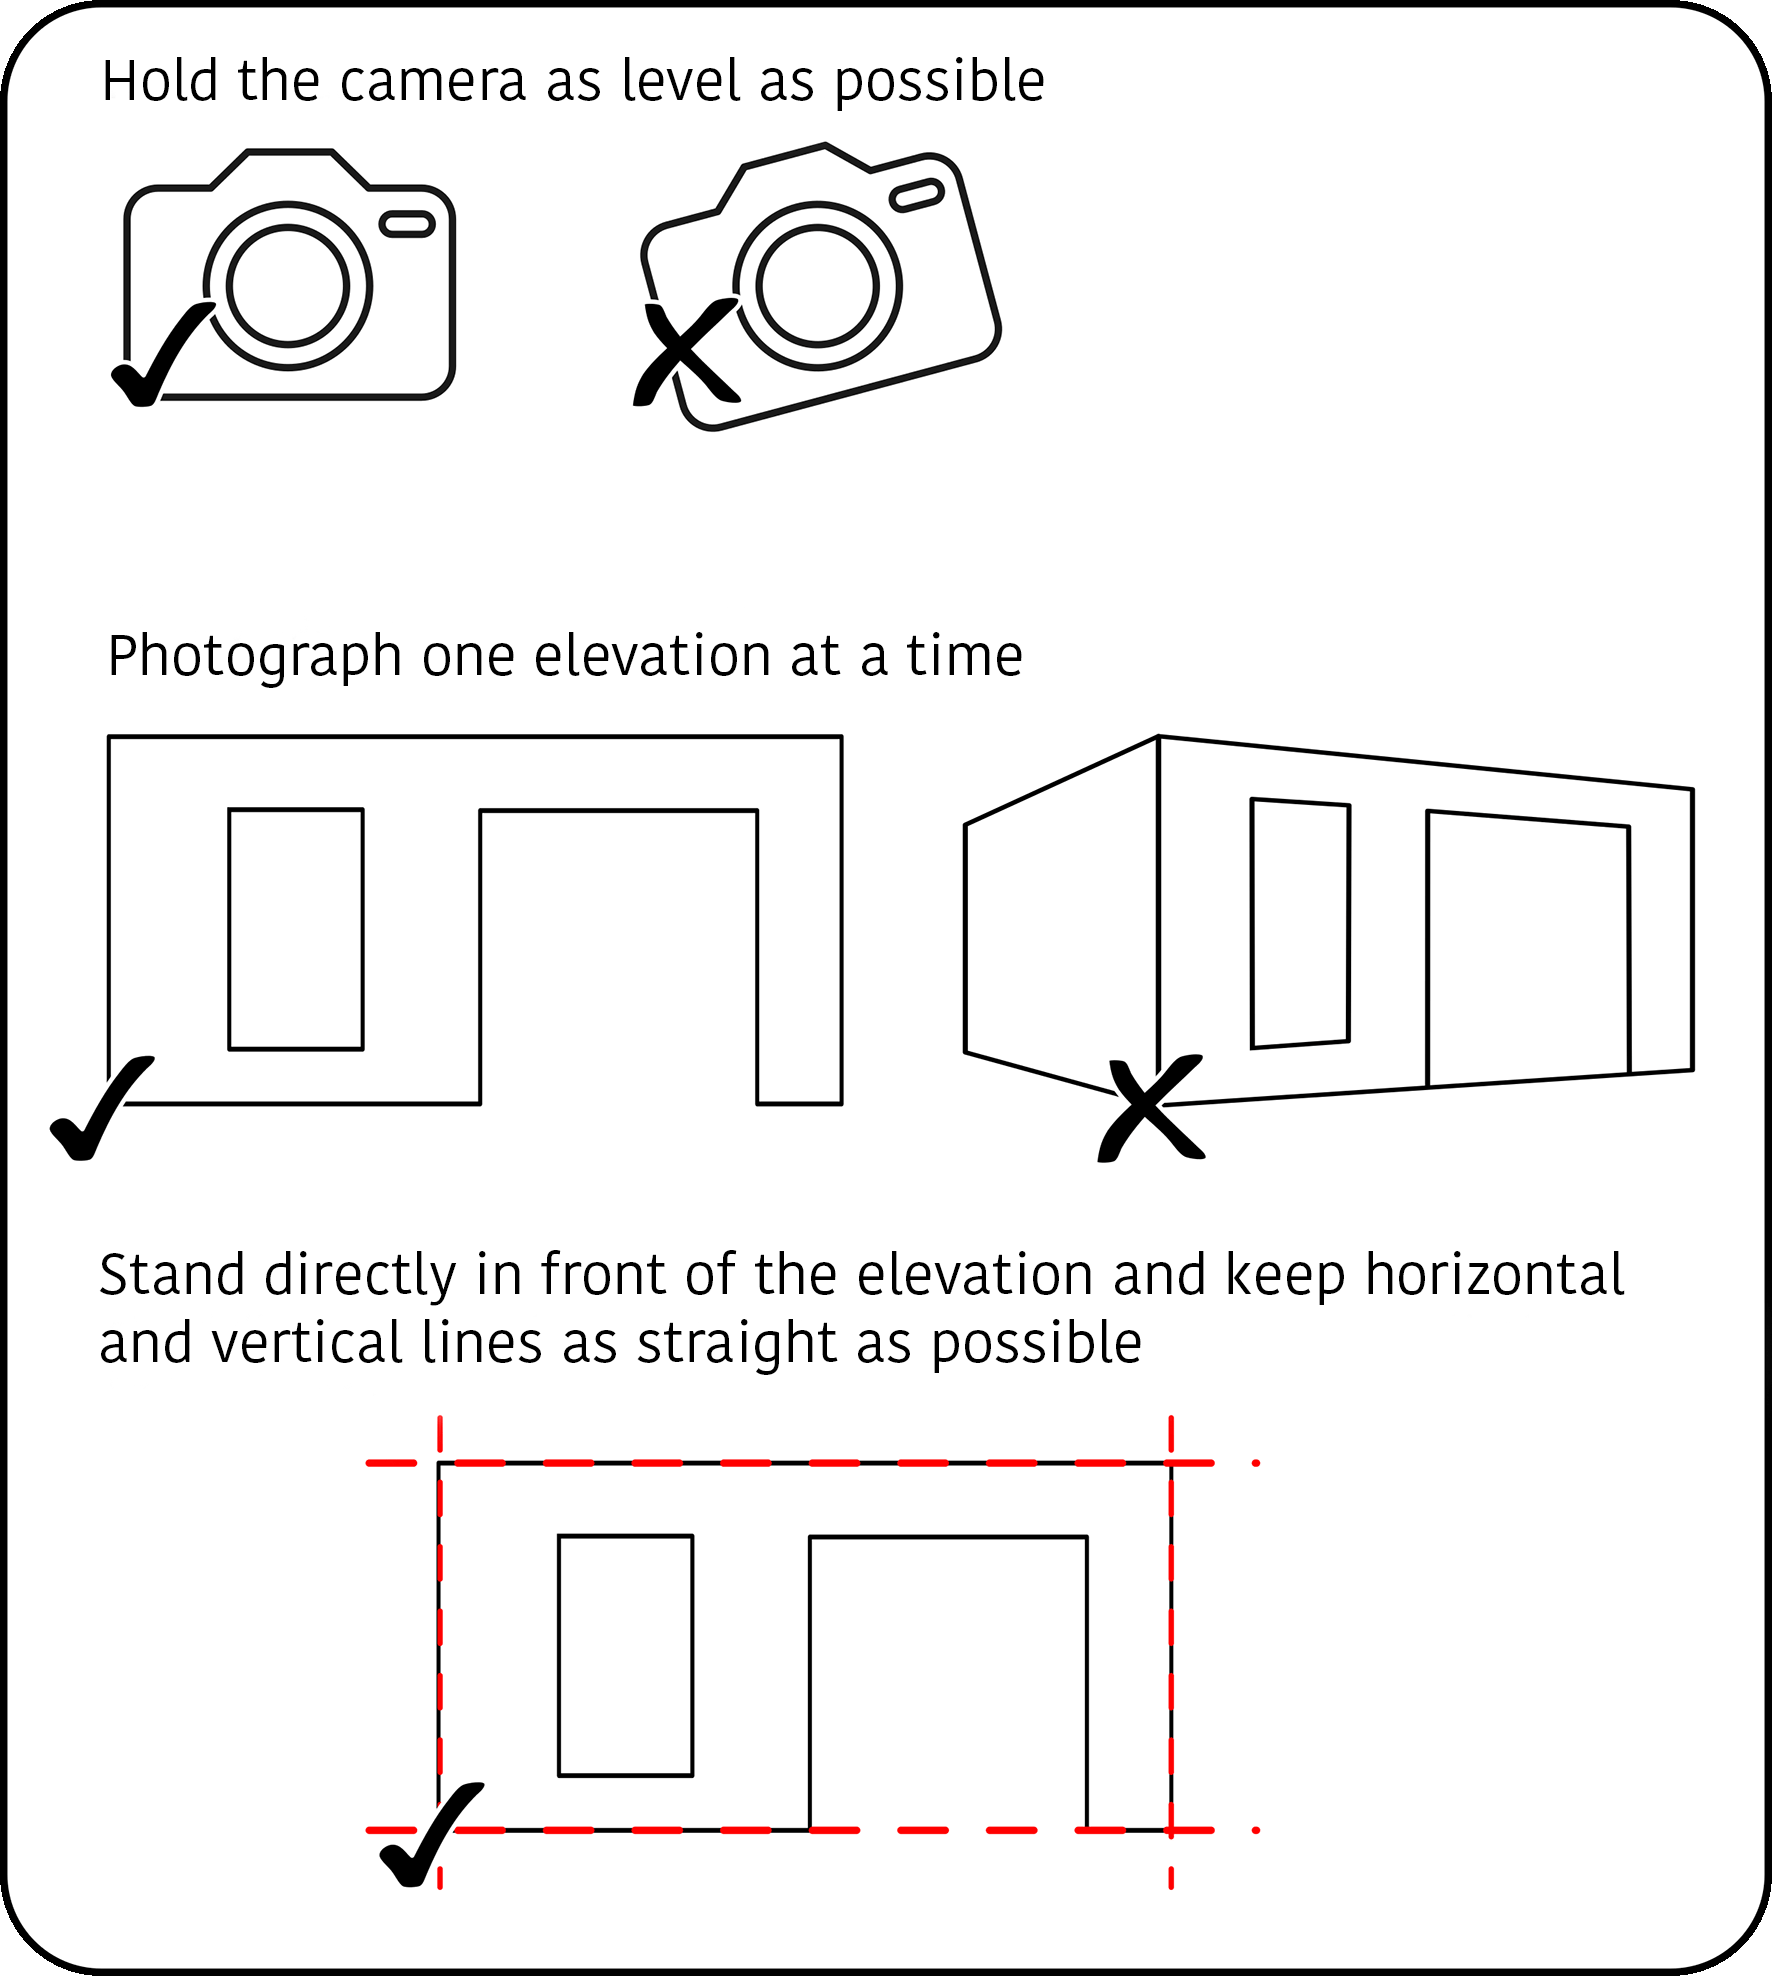 Guide for taking the photo